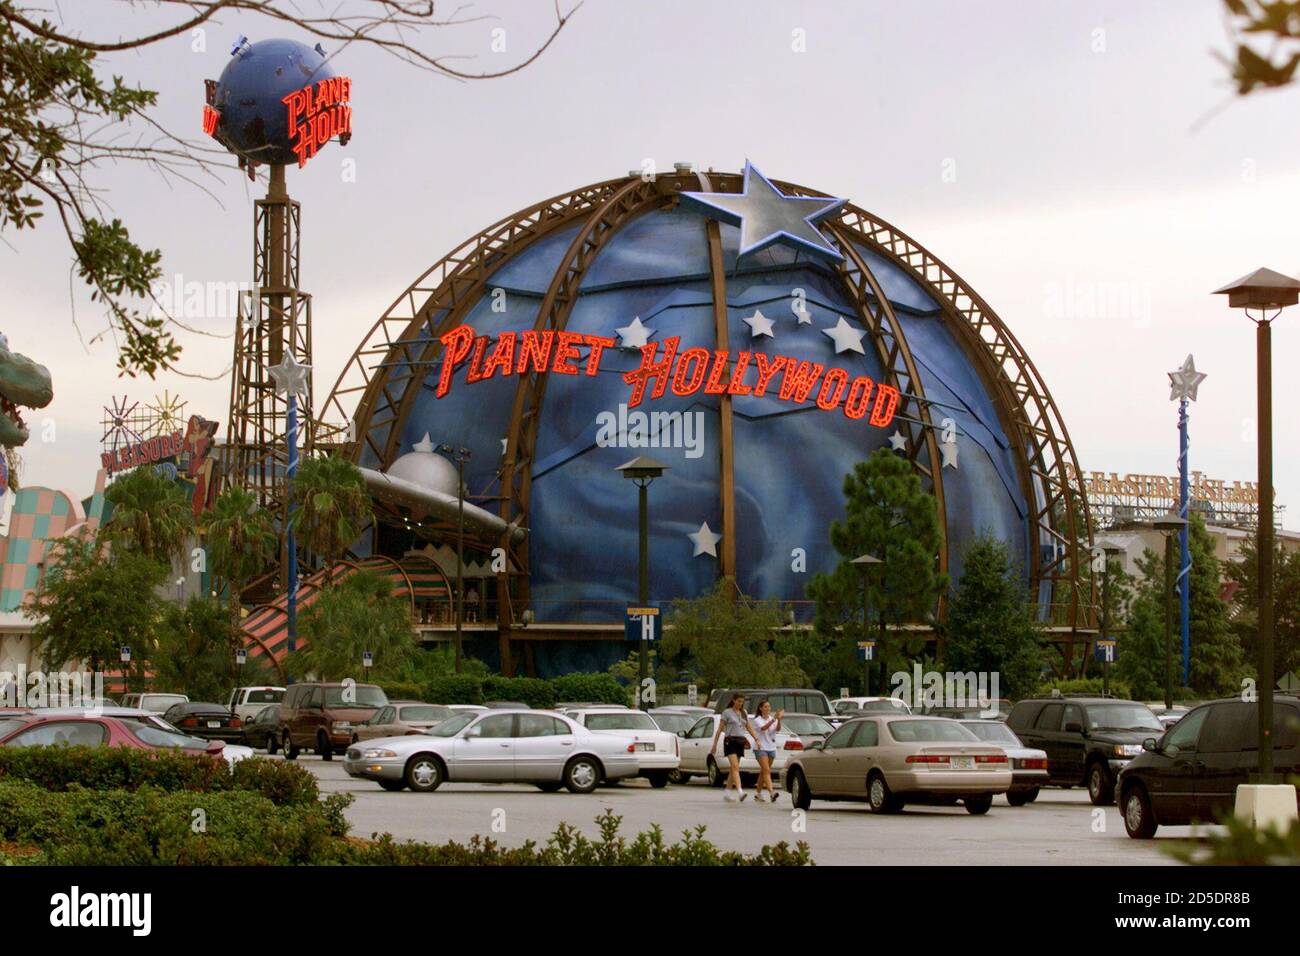 Planet Hollywood International Said On August 17 That It Would Seek U S Bankruptcy Court Shelter In A Financial Make Over Involving Cash Injections From A Singapore Billionaire And A Saudi Prince Much Imitated